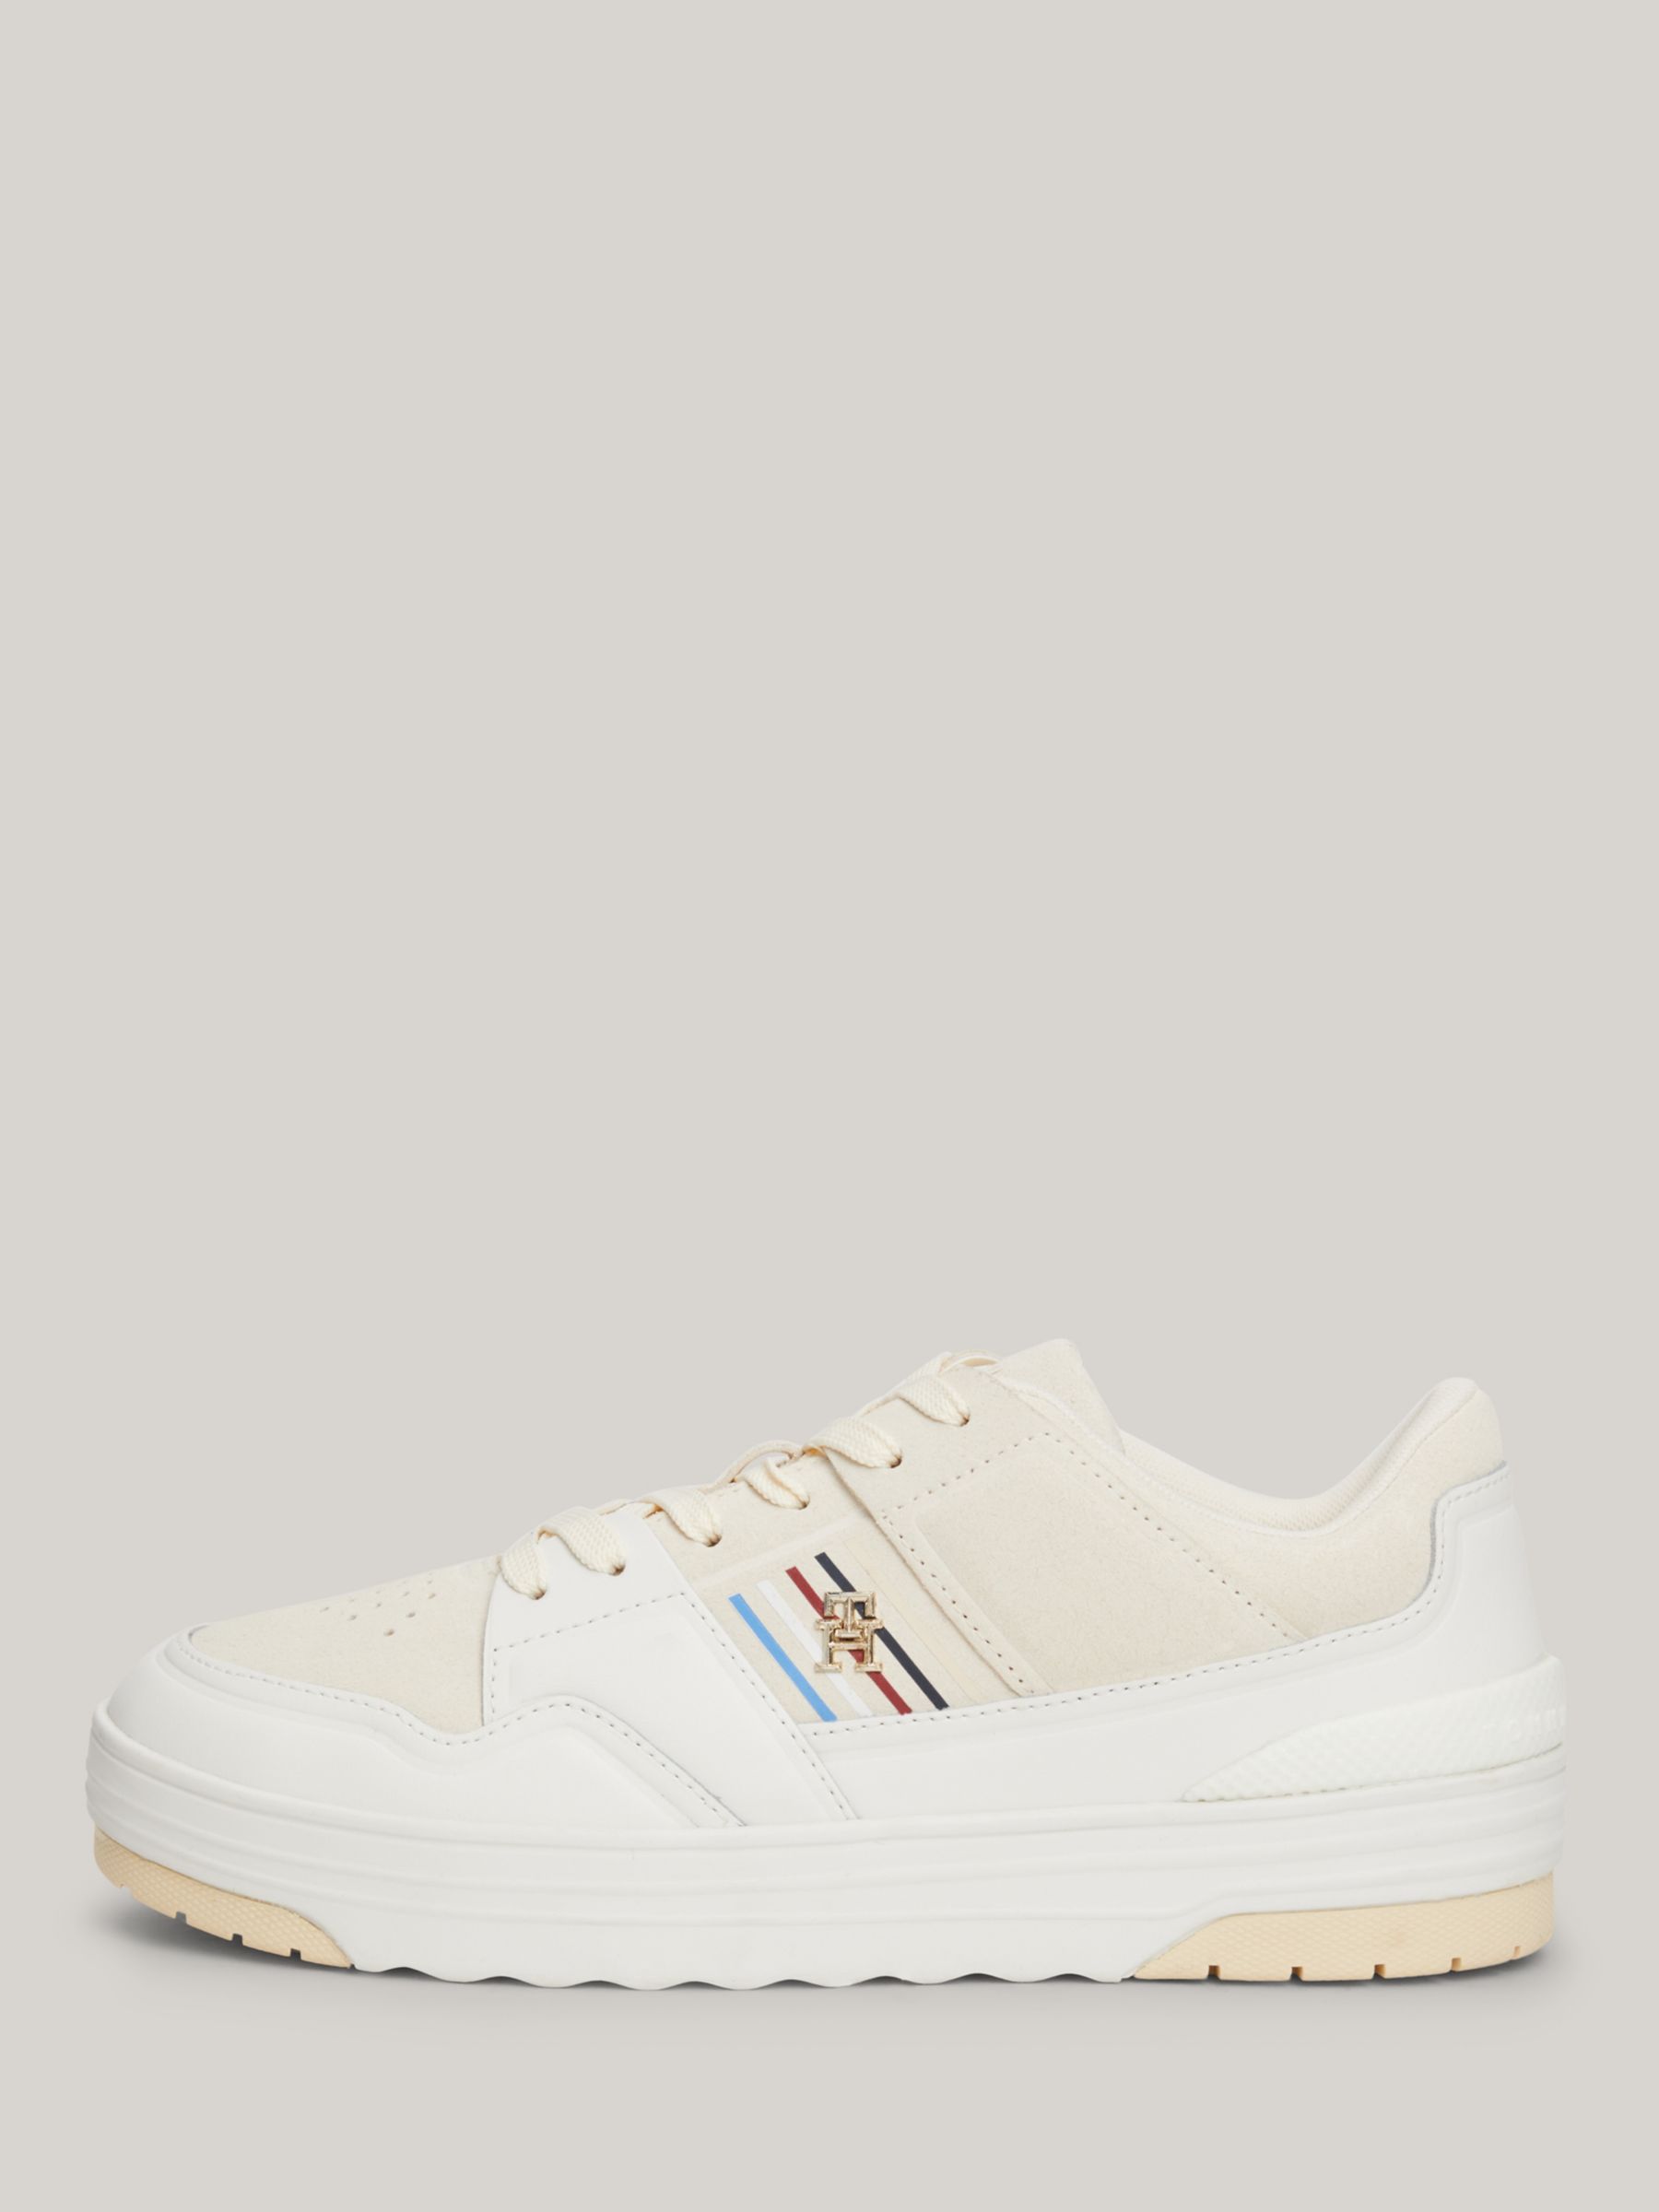 Buy Tommy Hilfiger Global Stripe Basketball Trainers, Calico Online at johnlewis.com